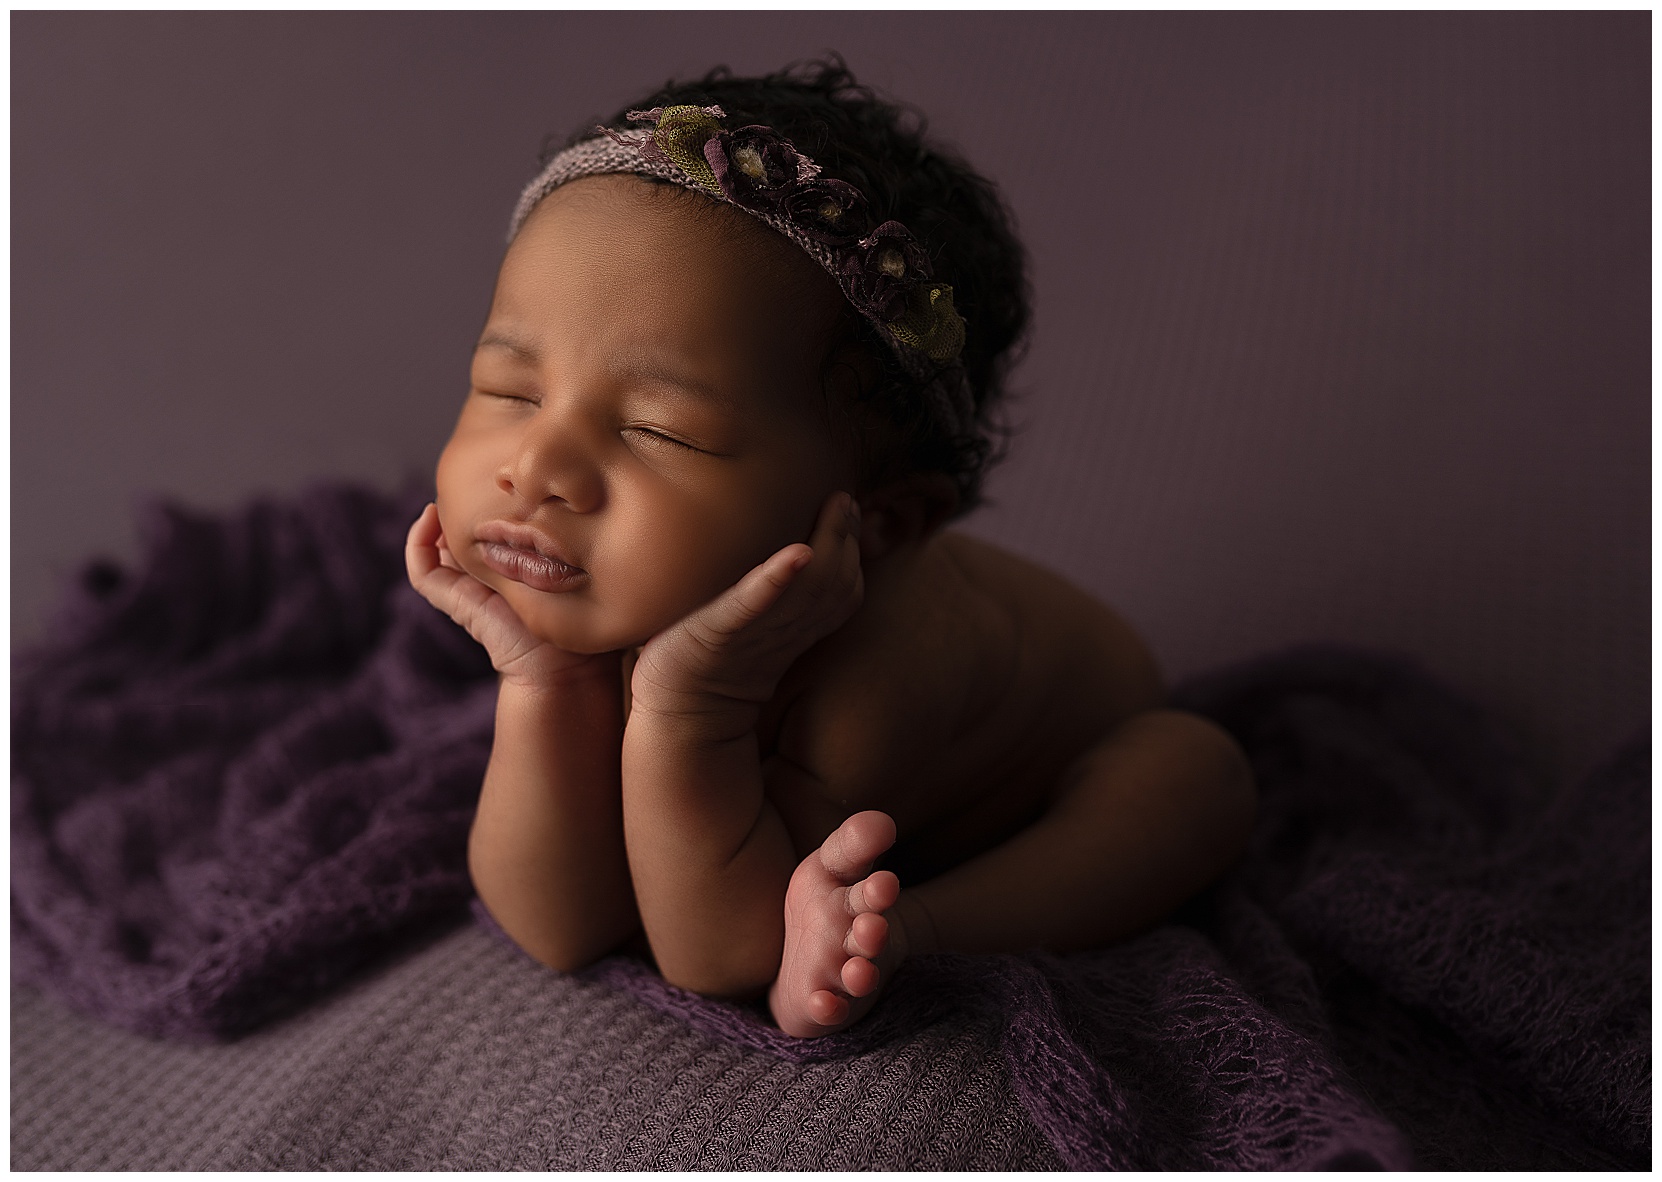 baby in the froggy pose on purple fabric